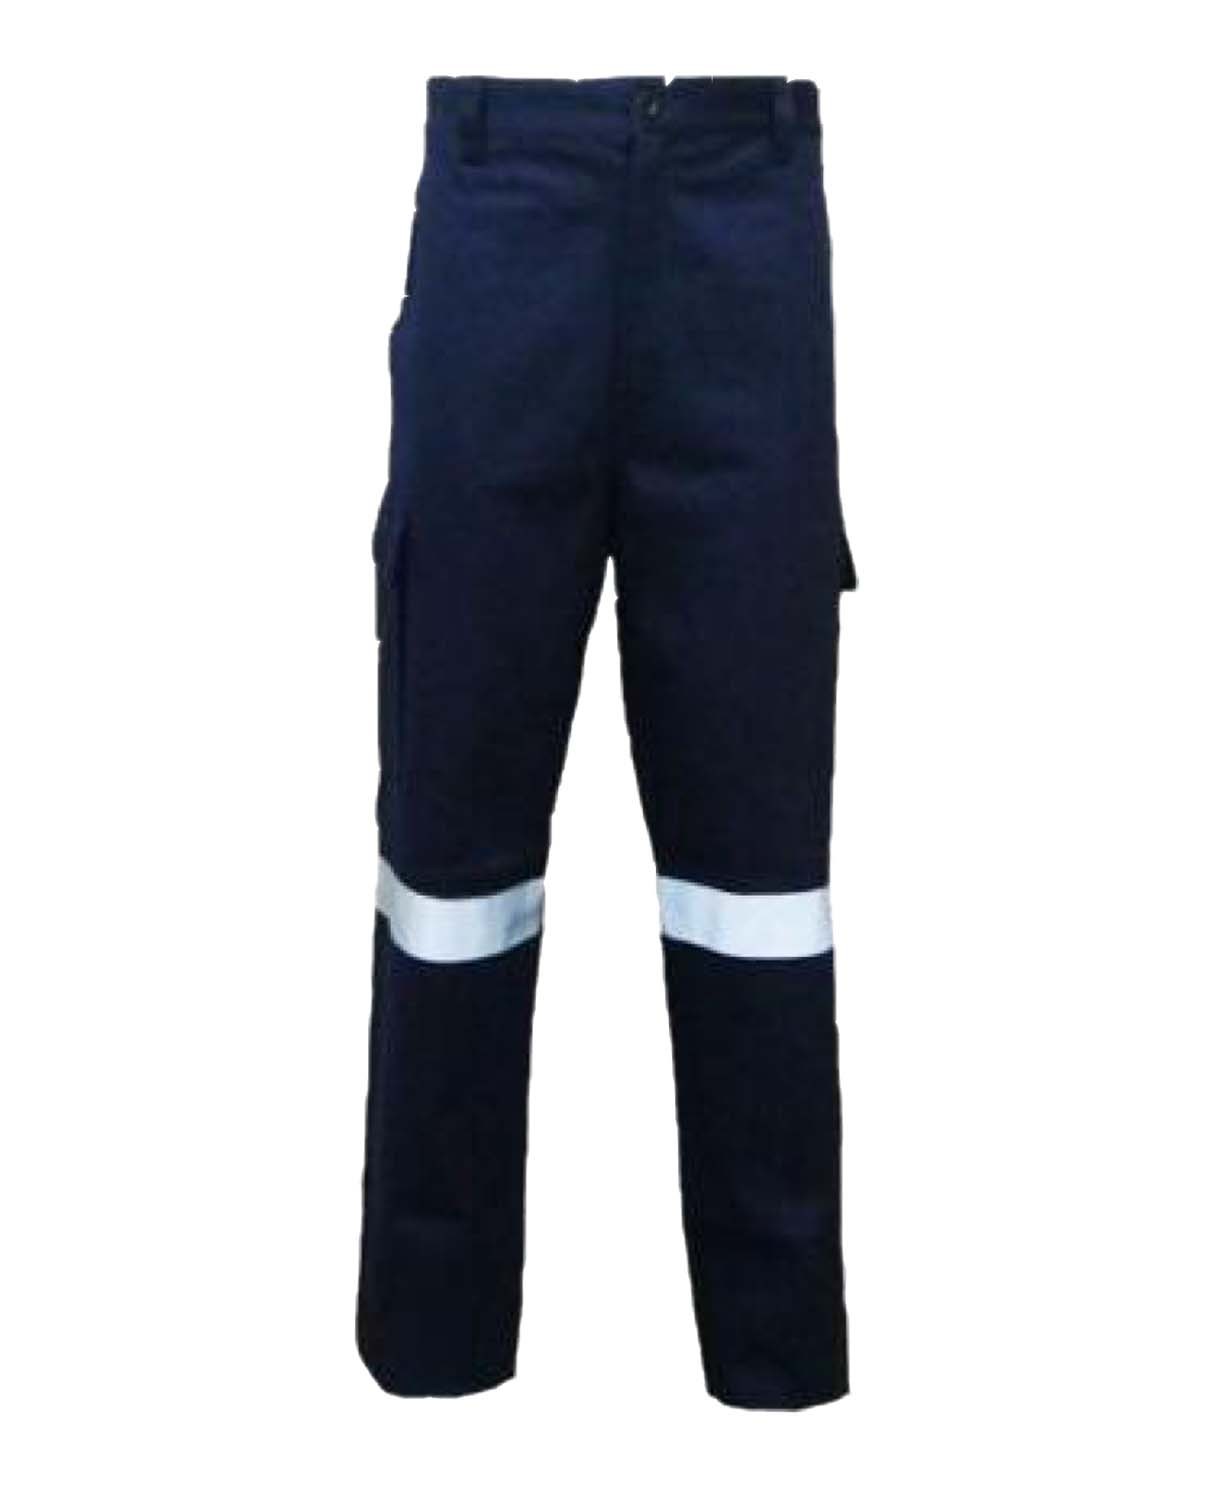 02. Cargo Pants with Refletive Tape for Construction